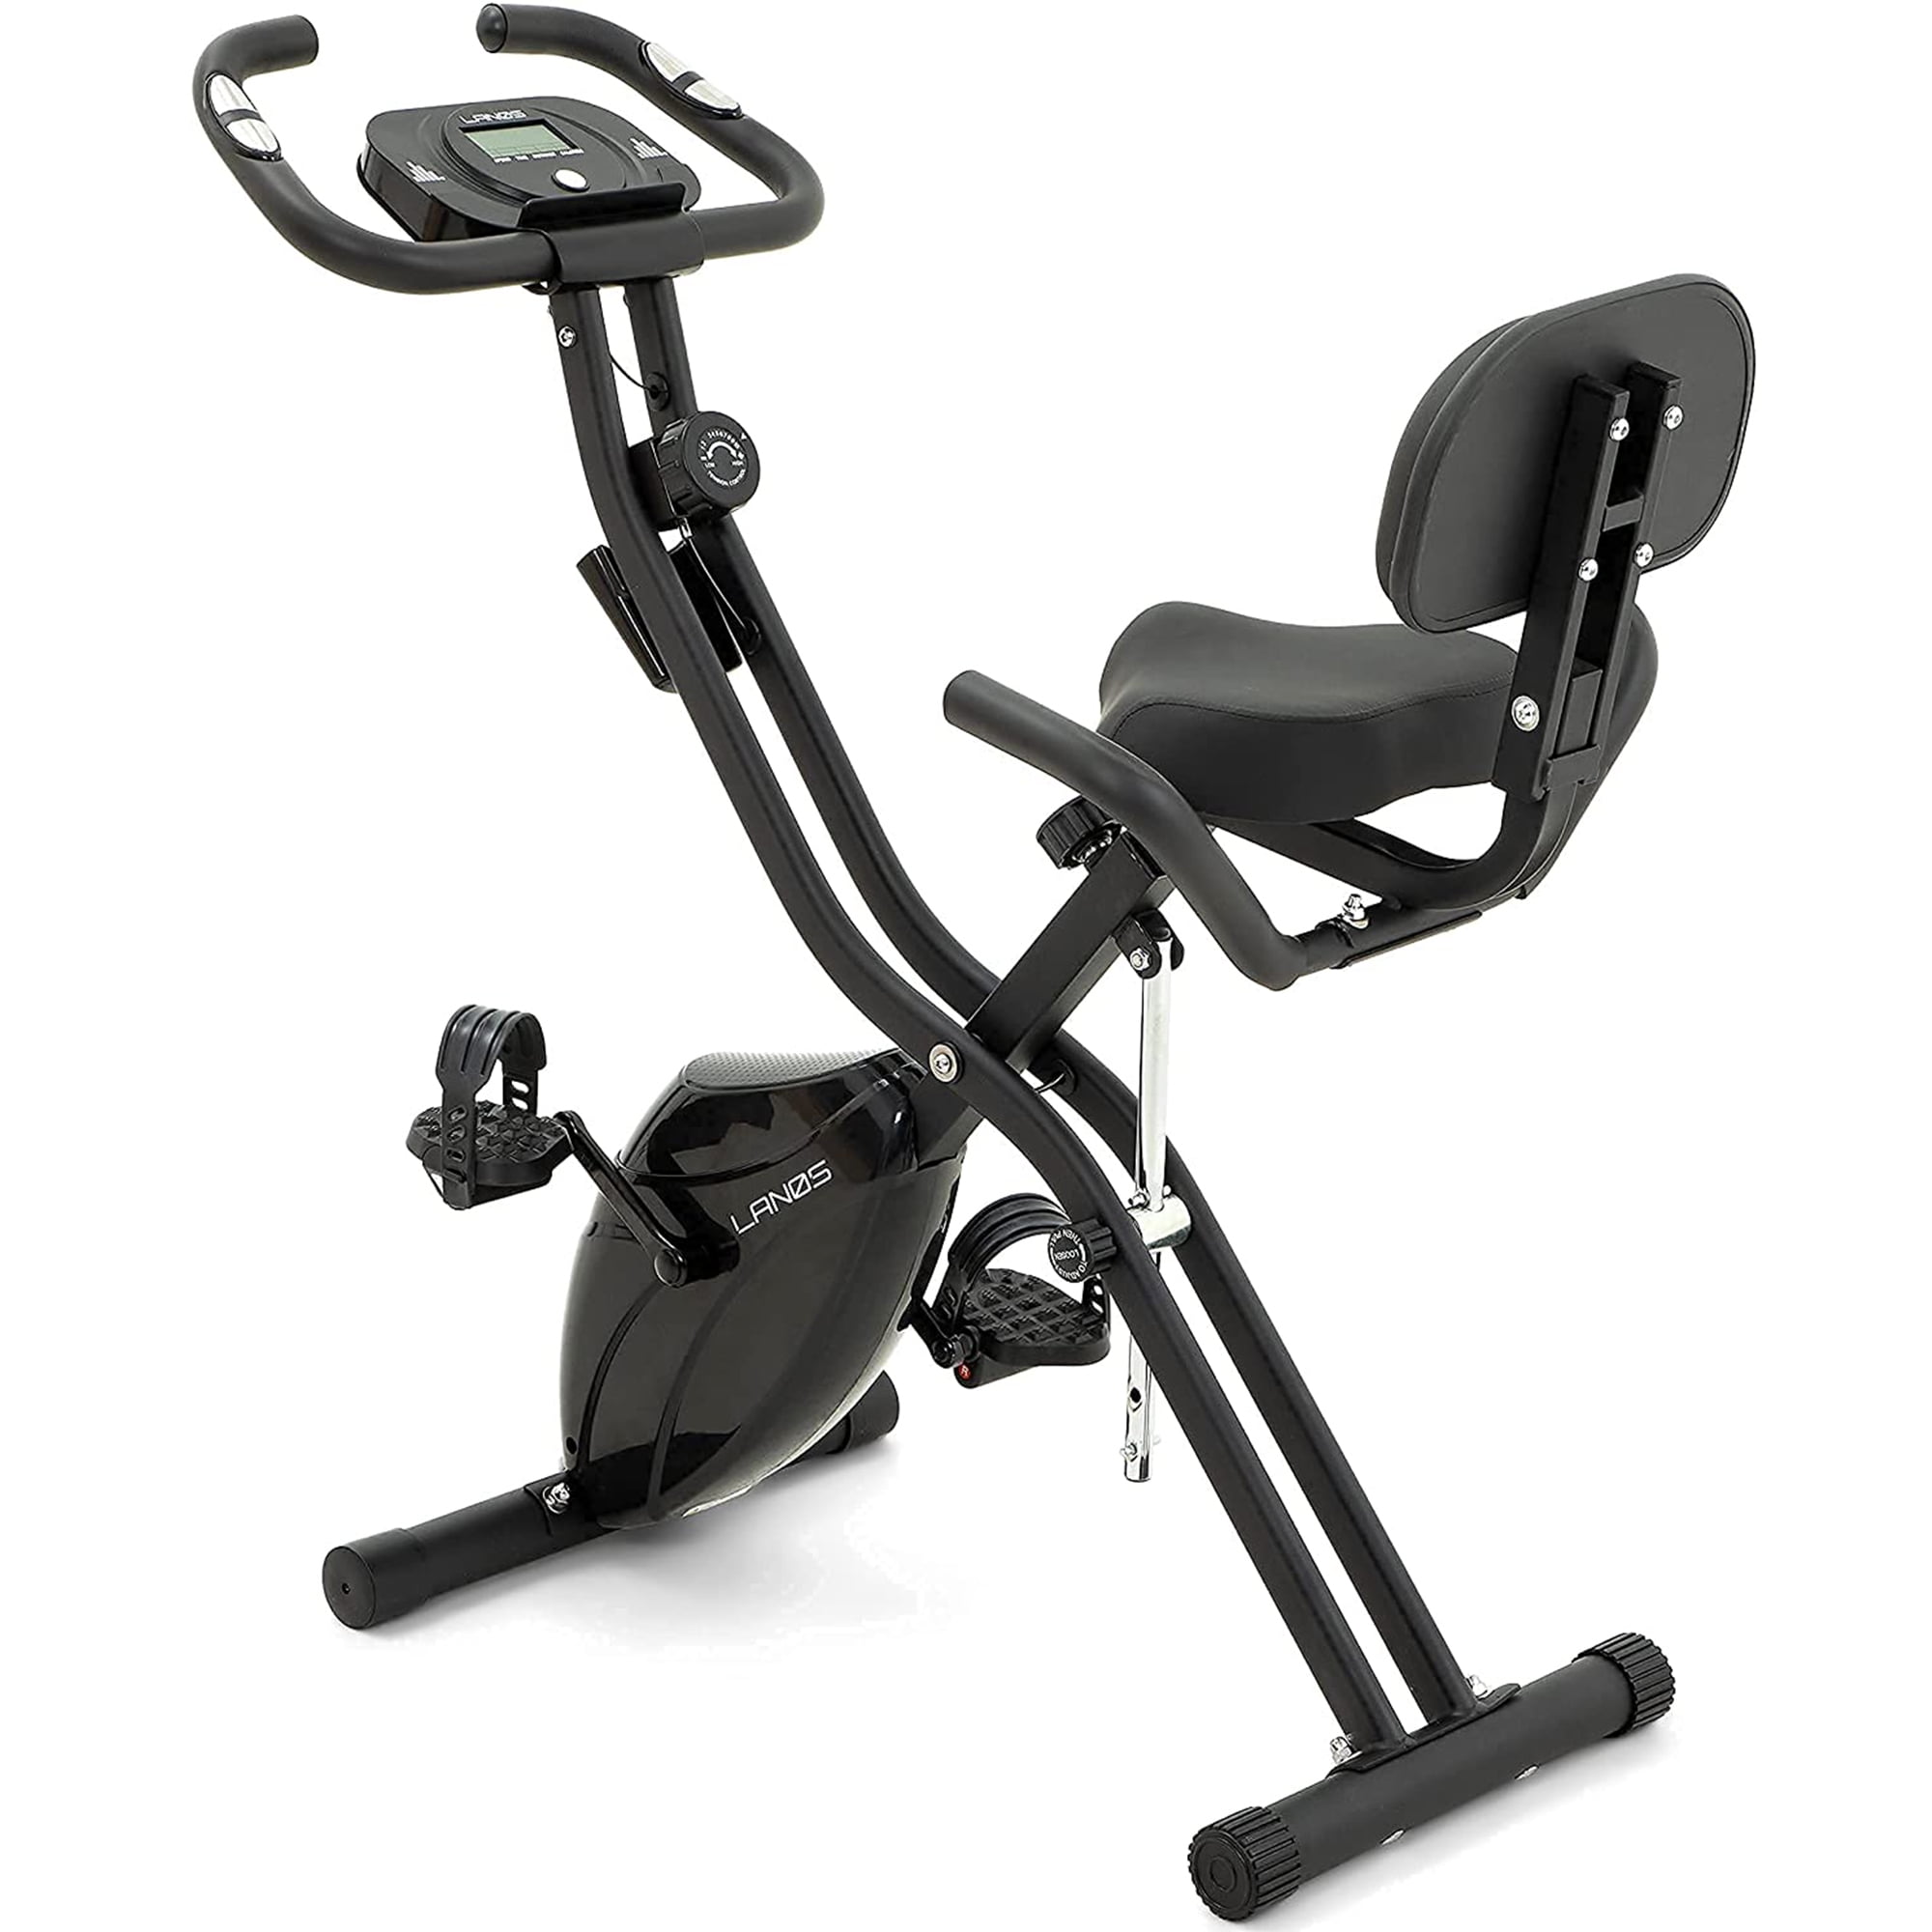 Details about   Exercise Bicycle Cycling Fitness Stationary Bike Cardio Home Indoor Black Lot 